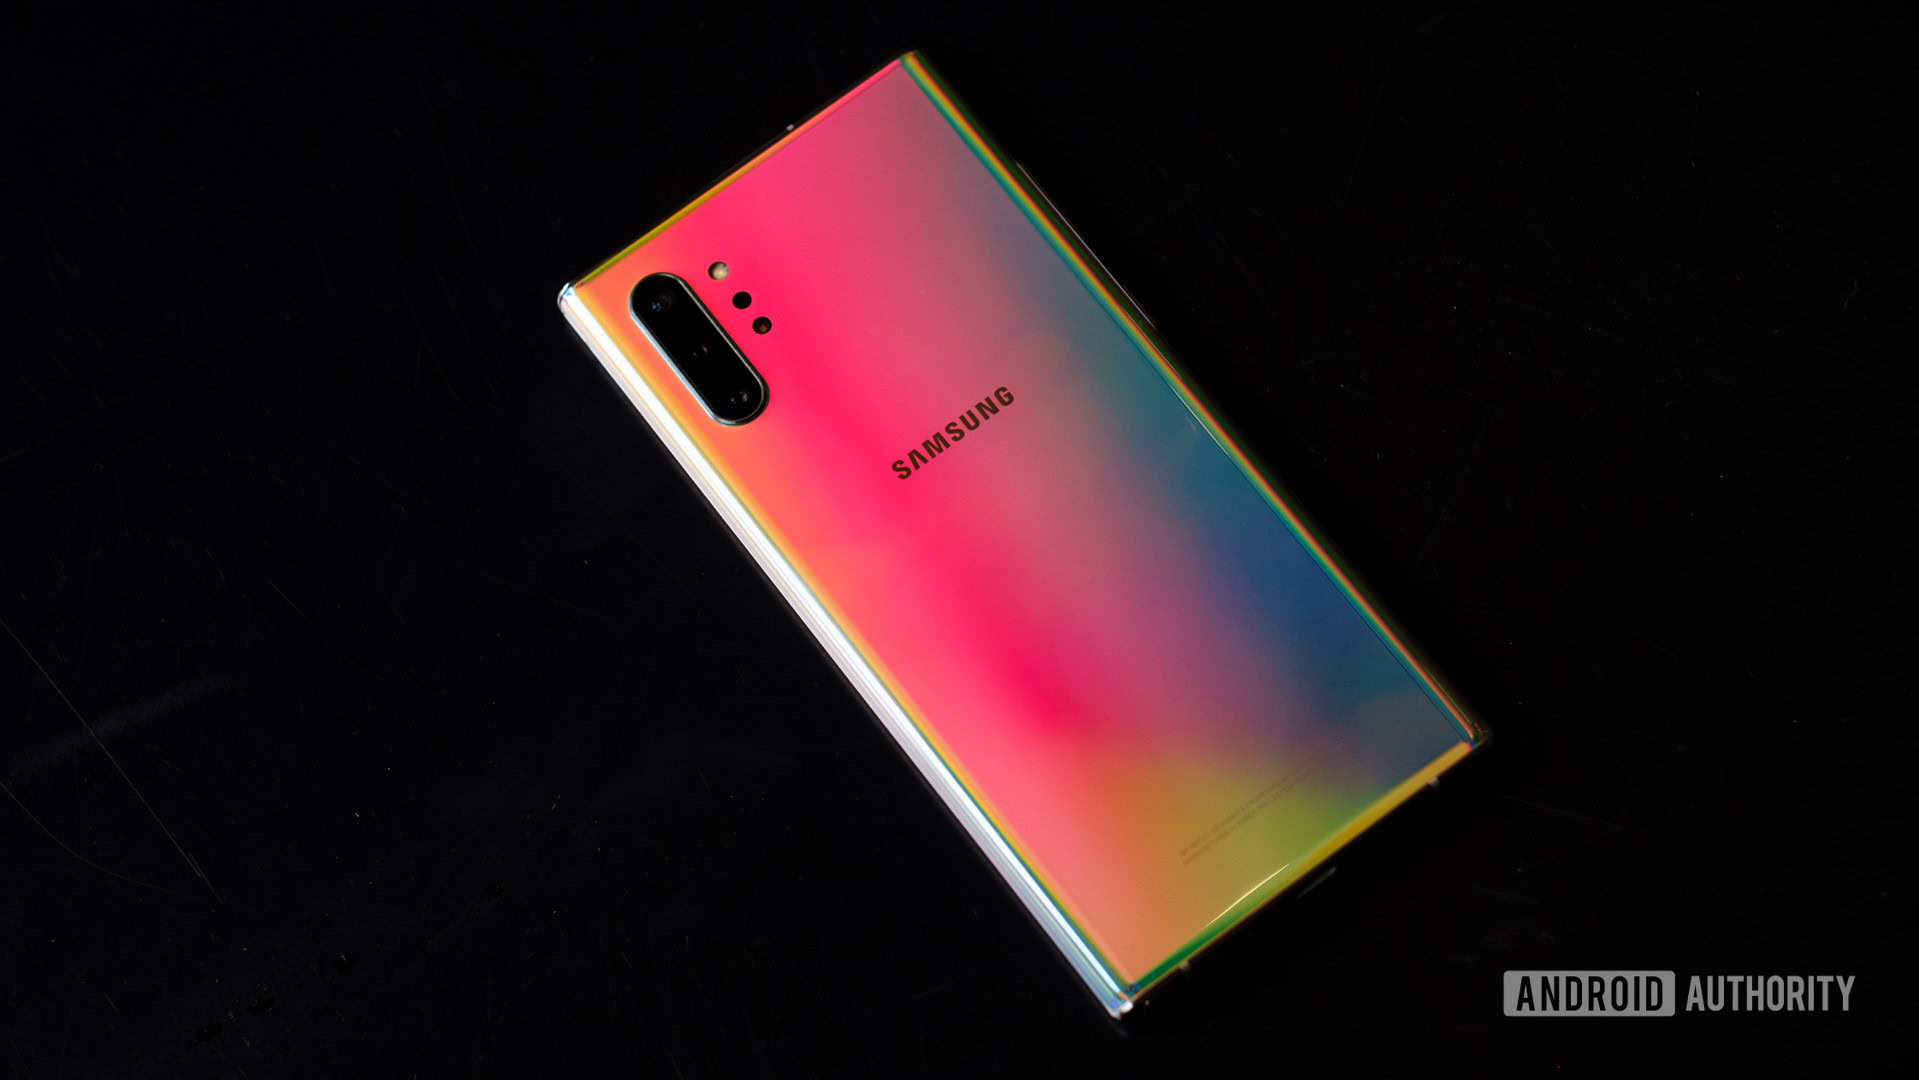 Galaxy Note 10, Note 10 Plus, and Note 10 Plus 5G: Prices and